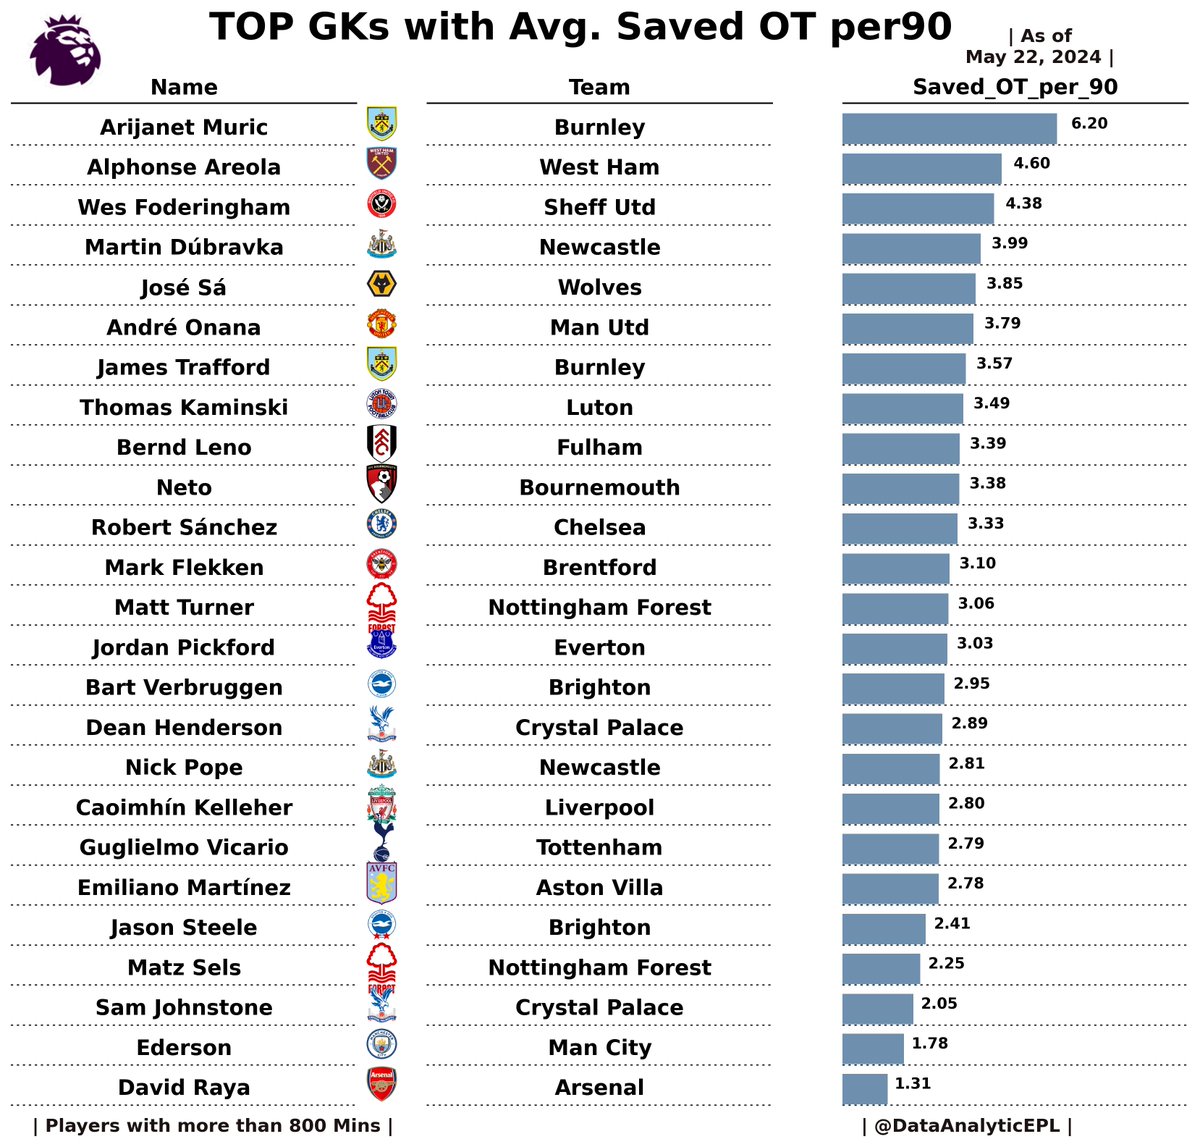 🚨Mikel Arteta's ARSENAL is special.

Look at How much on target shot DAVID RAYA saved per90. just 1.31.

Manchester City's EDERSON is close too.

Manchester United's ONANA also saved quite a lot on target shot per90.

The ball simply did not go through DEFENCE towards RAYA.